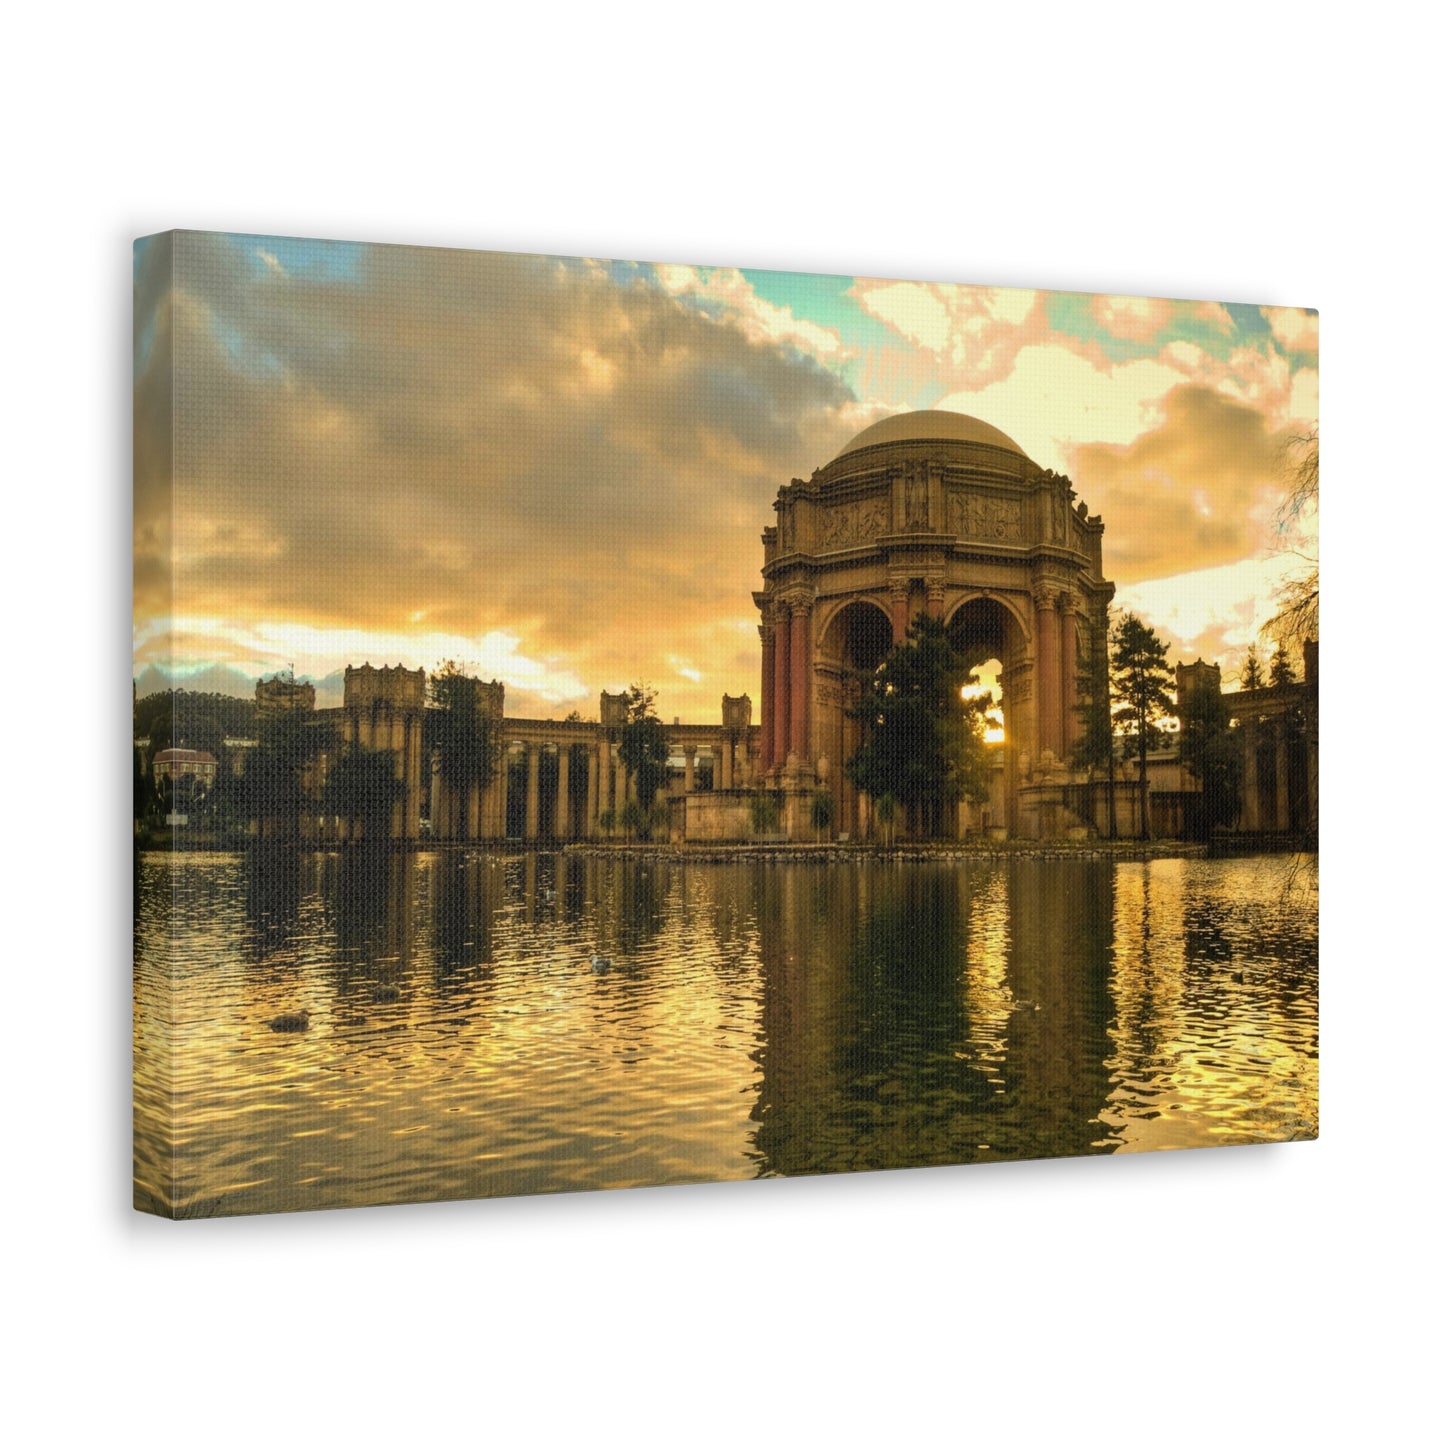 Canvas Print Of Palace Of Fine Arts In San Francisco For Wall Art